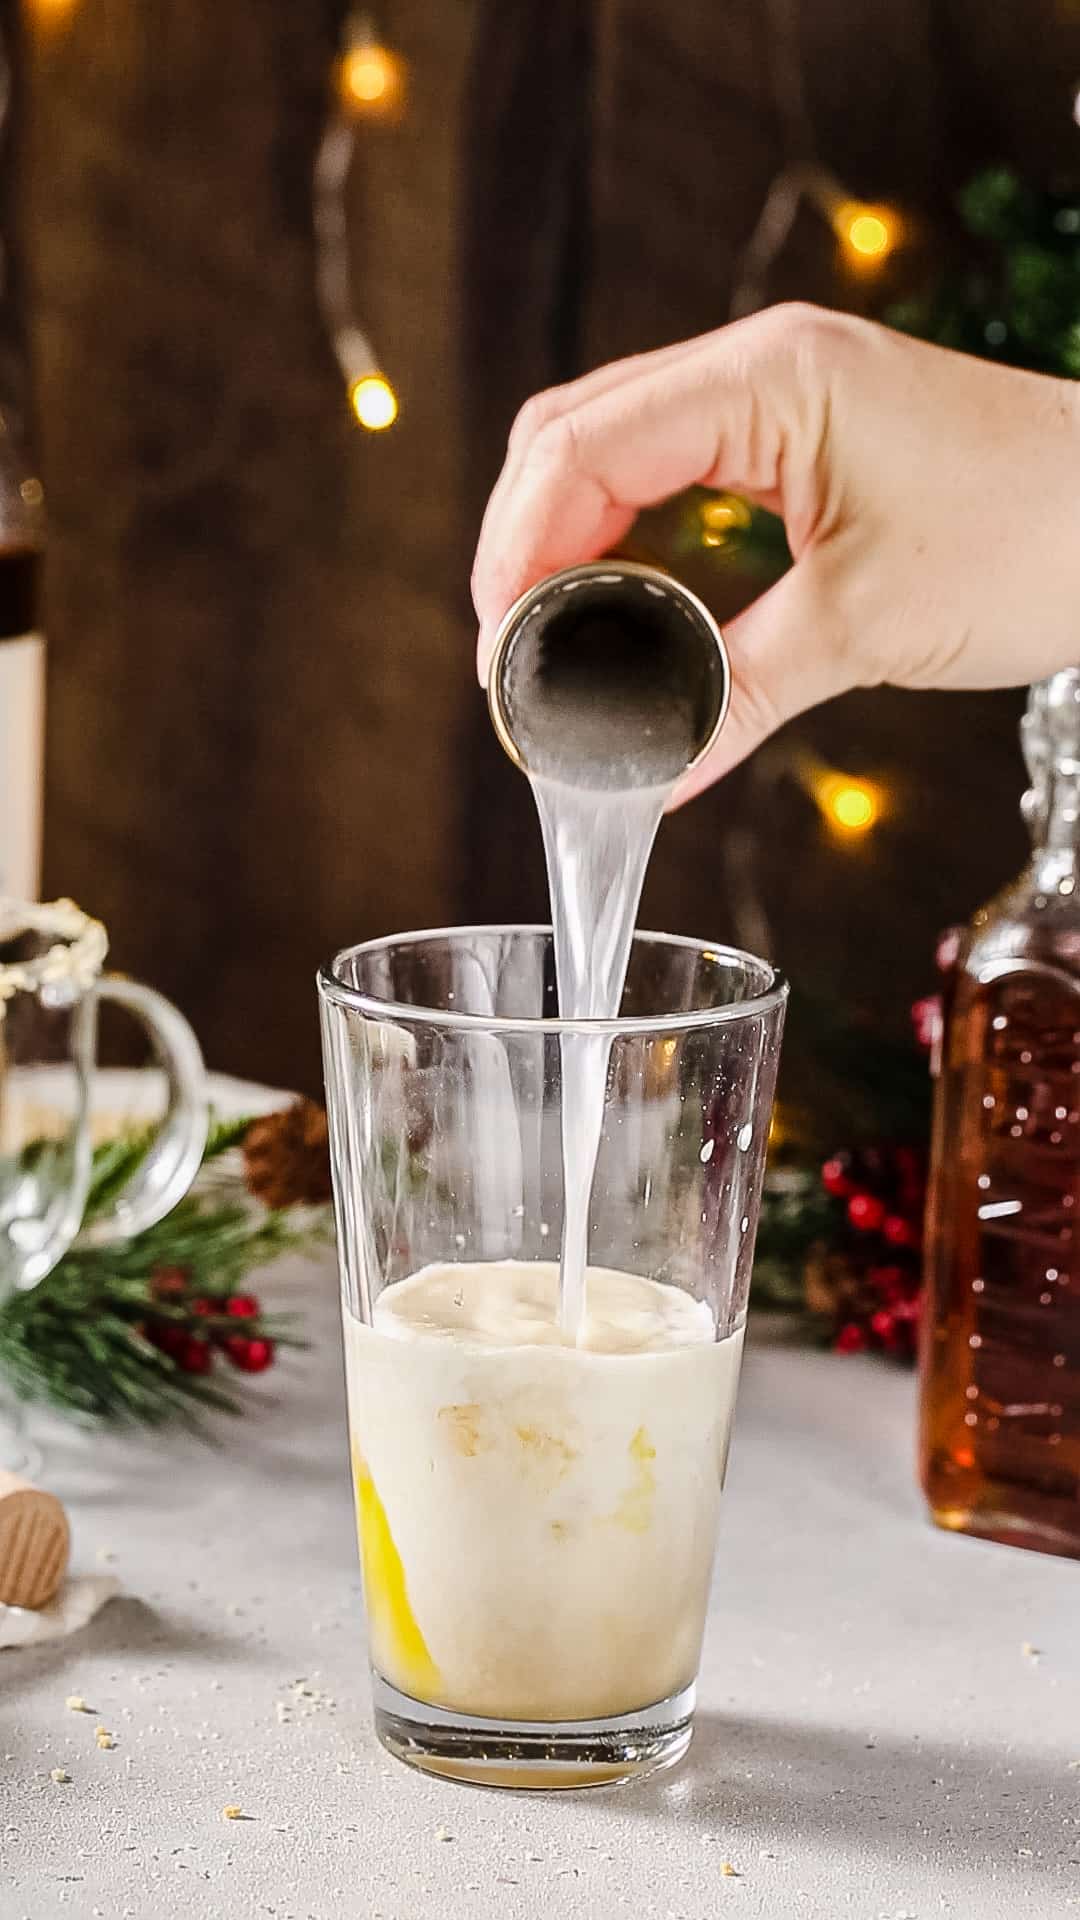 Hand pouring vanilla vodka from a jigger into a cocktail shaker filled with creamy liquid.